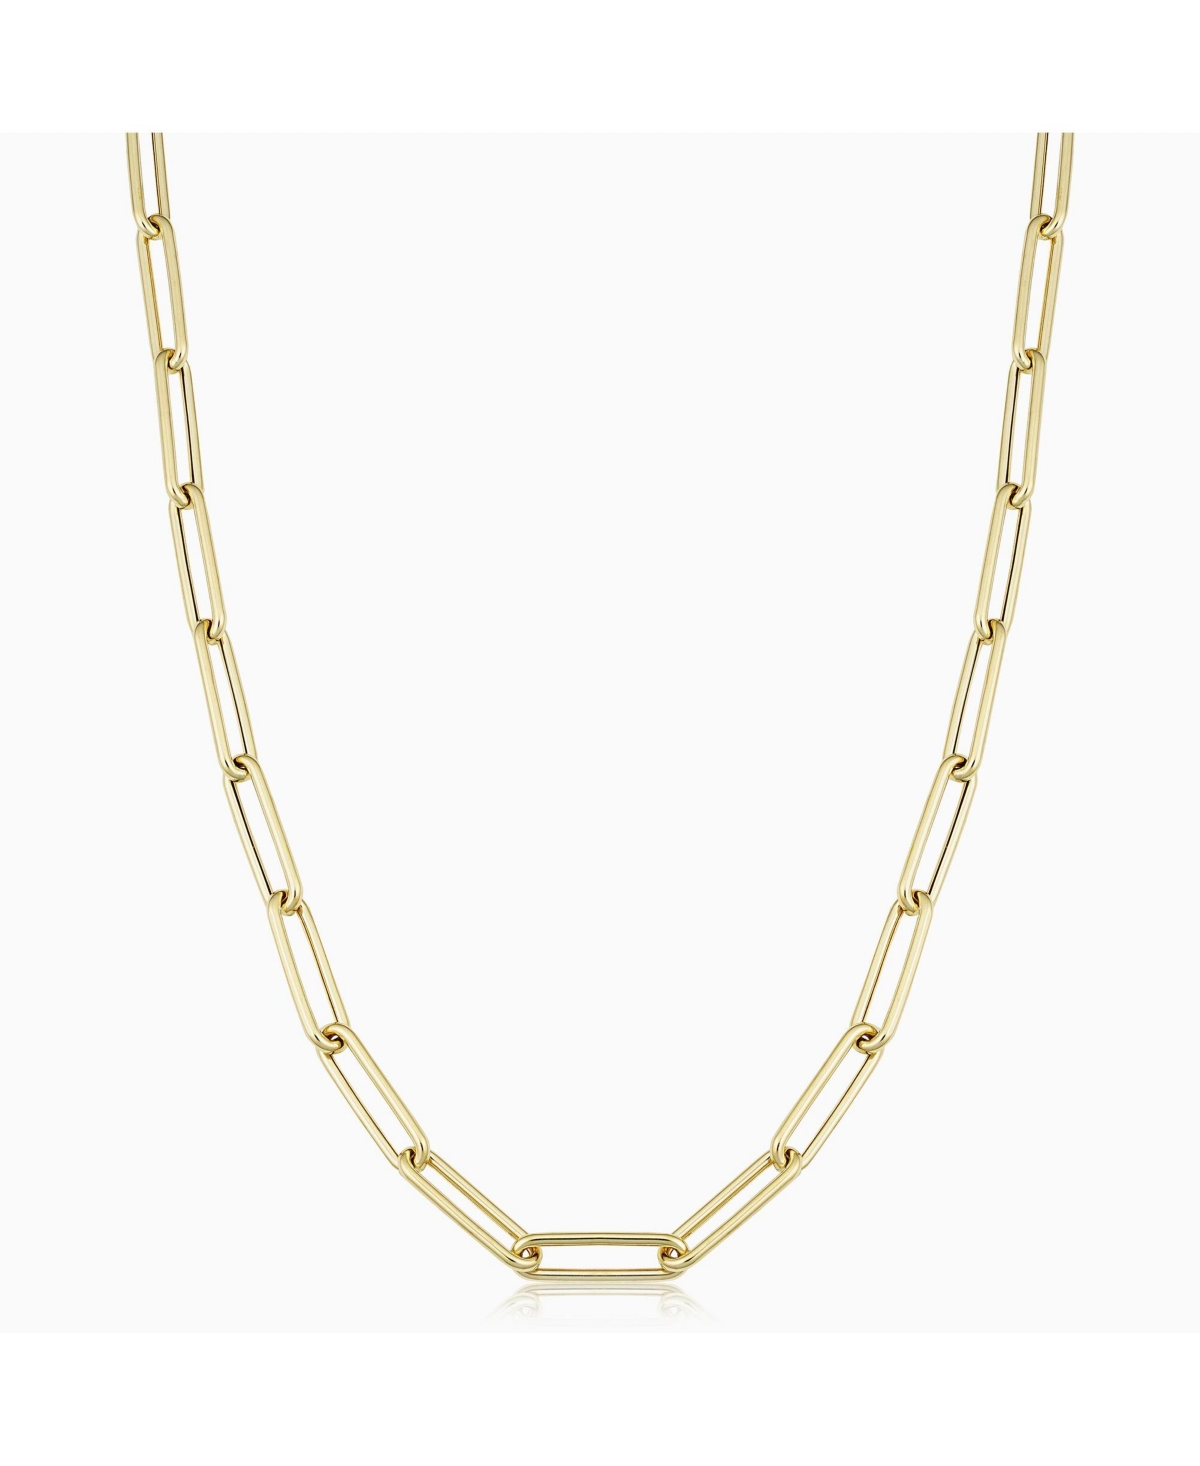 ORADINA BOND ST. NECKLACE 18" IN 14K YELLOW GOLD